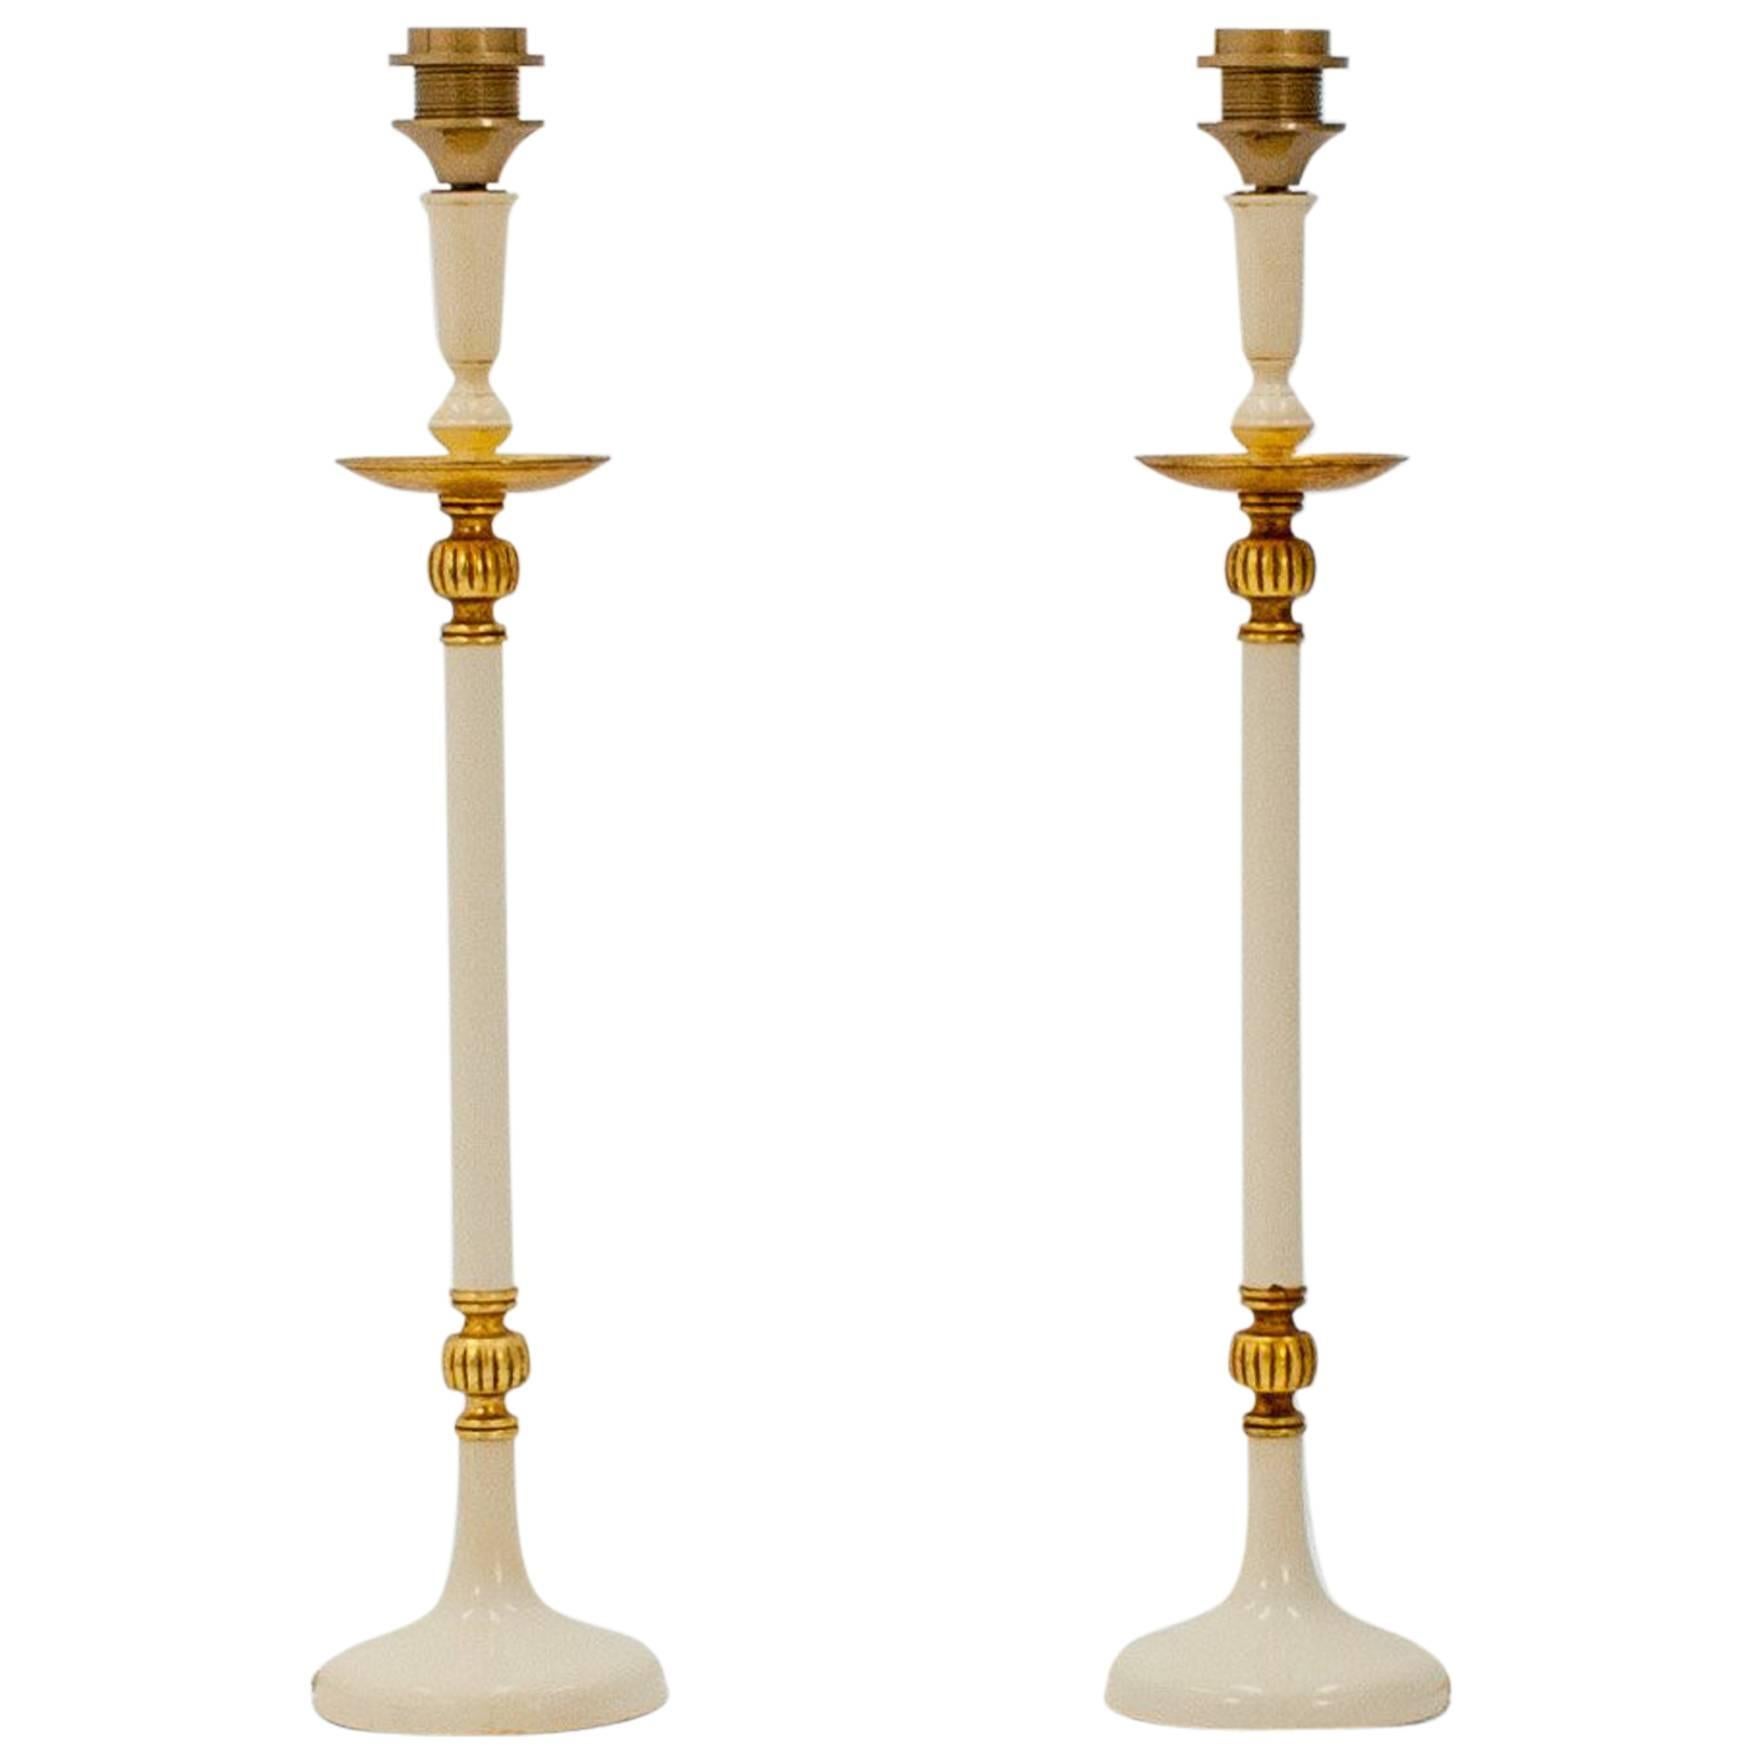 Pair of Hollywood Regency Style Table Lamp Bases, Italy, 1970s